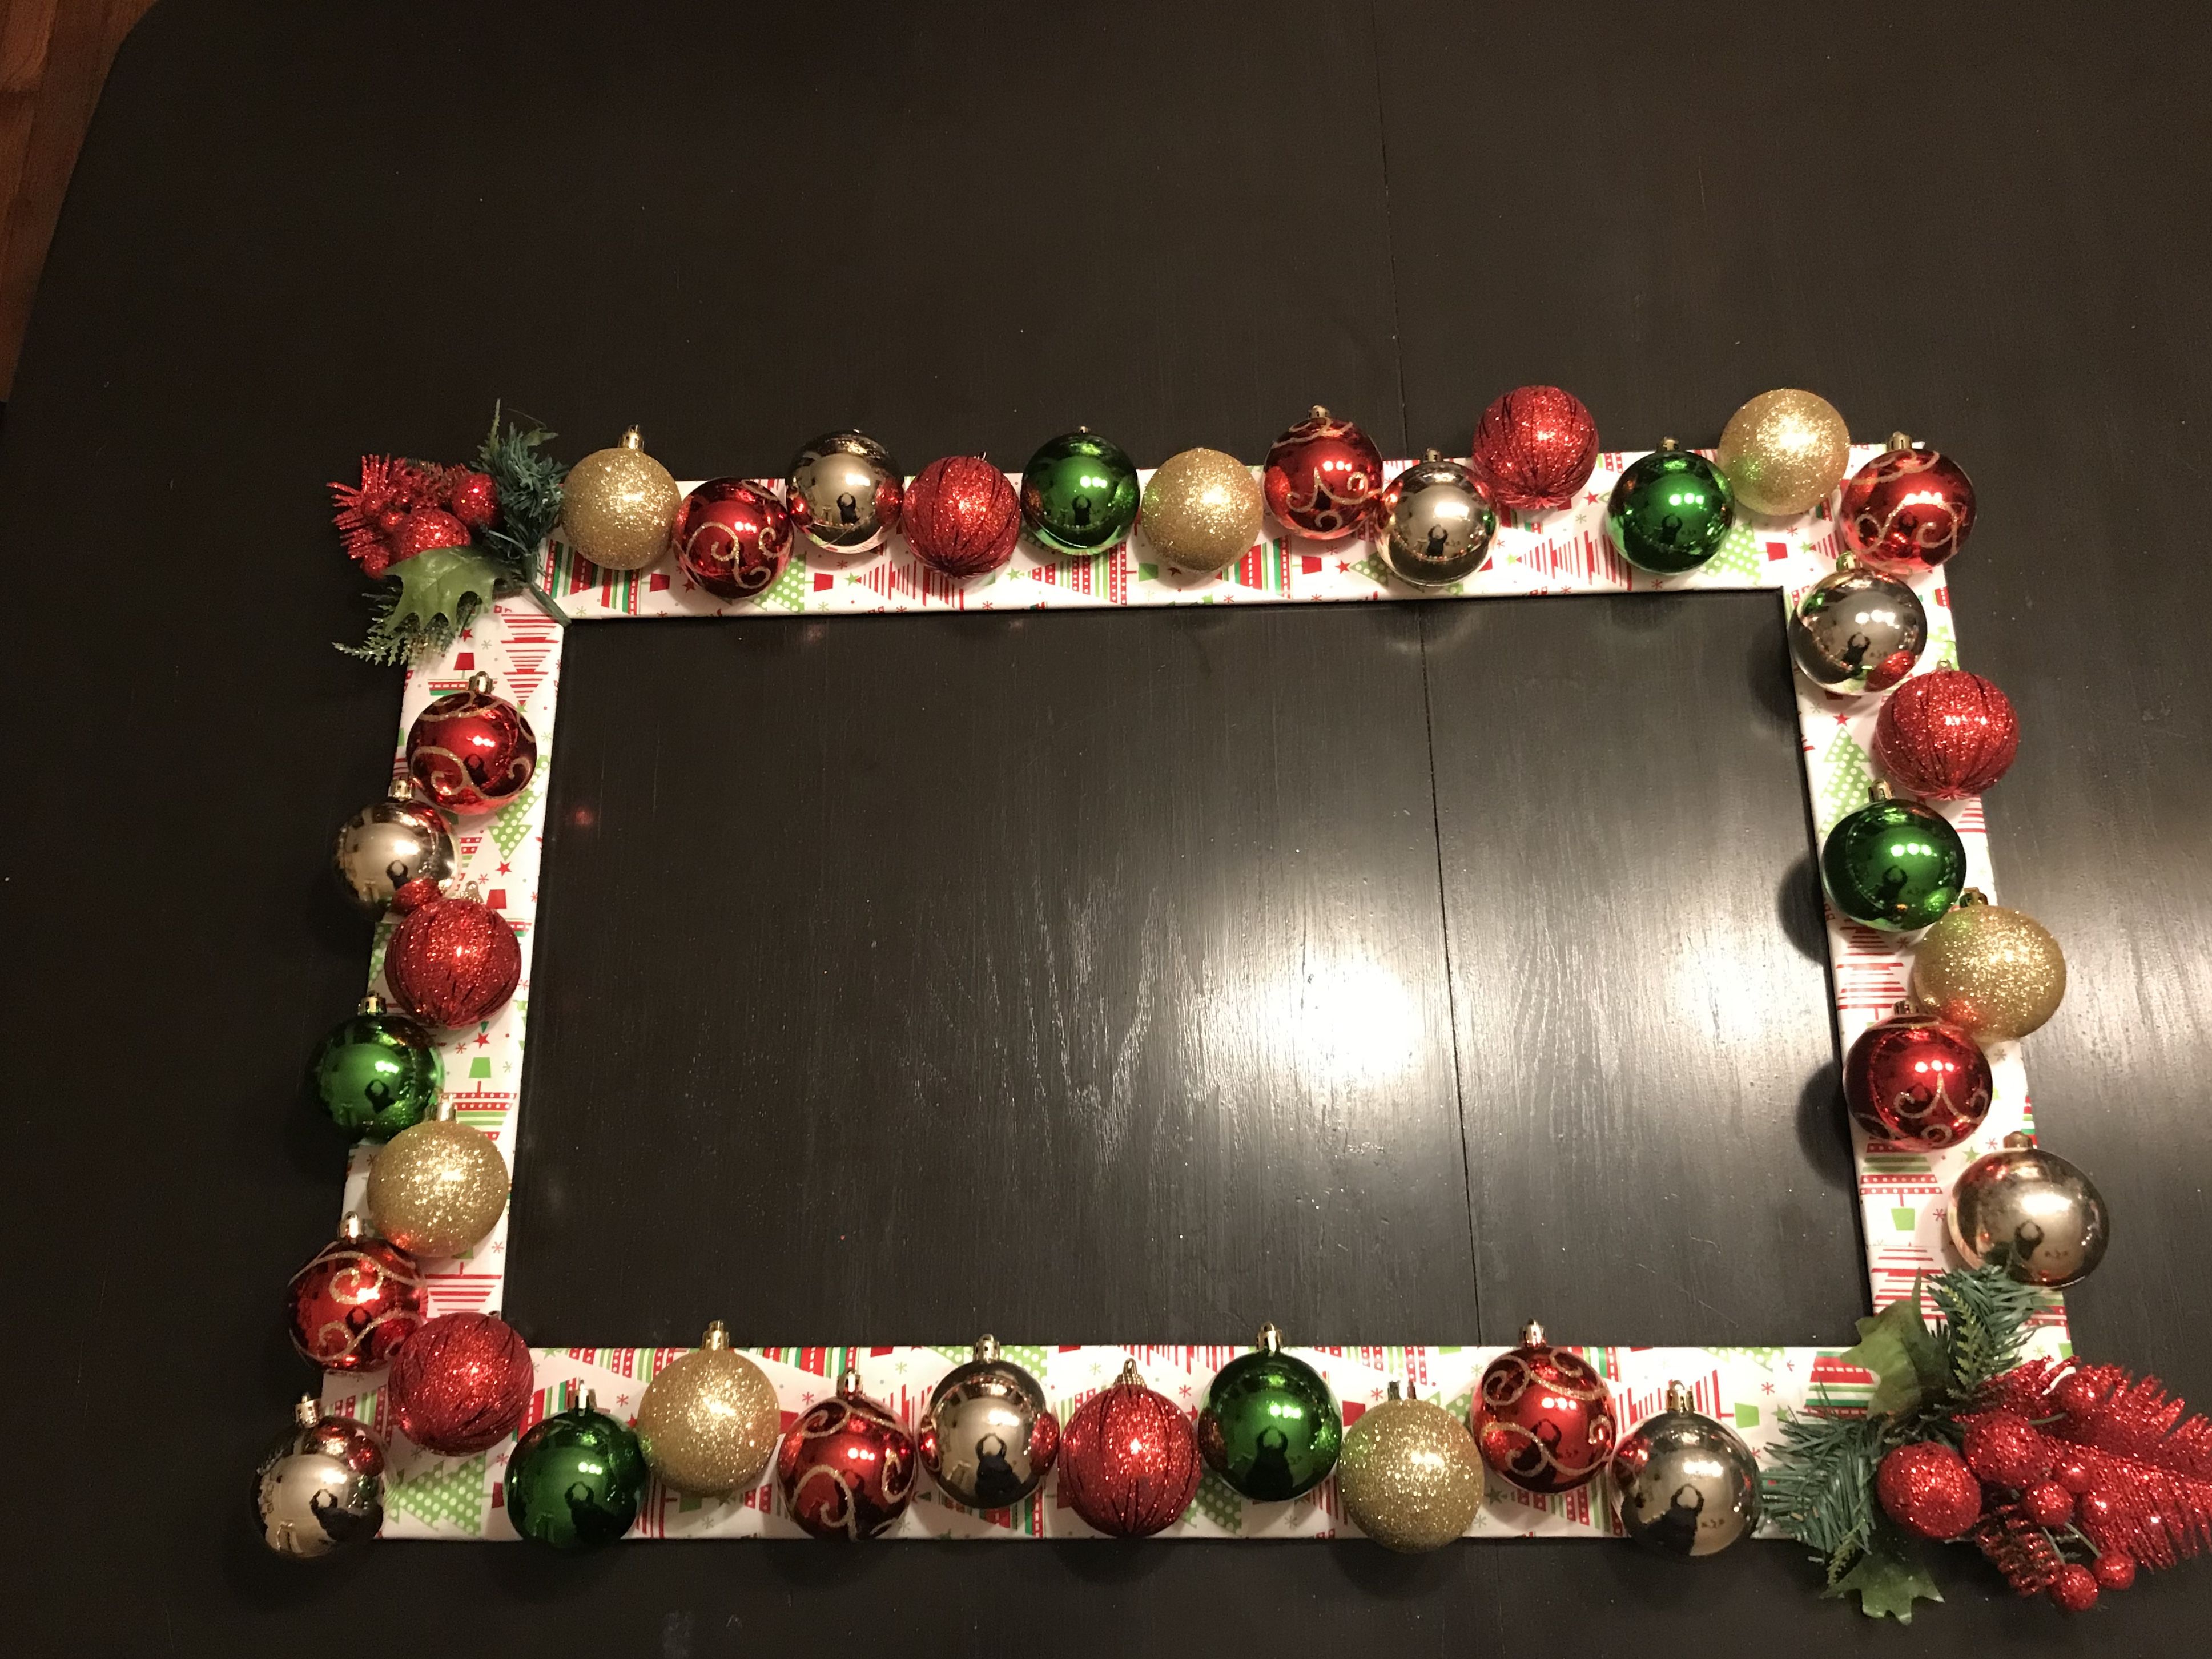 If you love to decorate your home for Christmas, don't forget the picture frames. These adorable picture frame Christmas crafts will really add extra pizzazz to your home! 